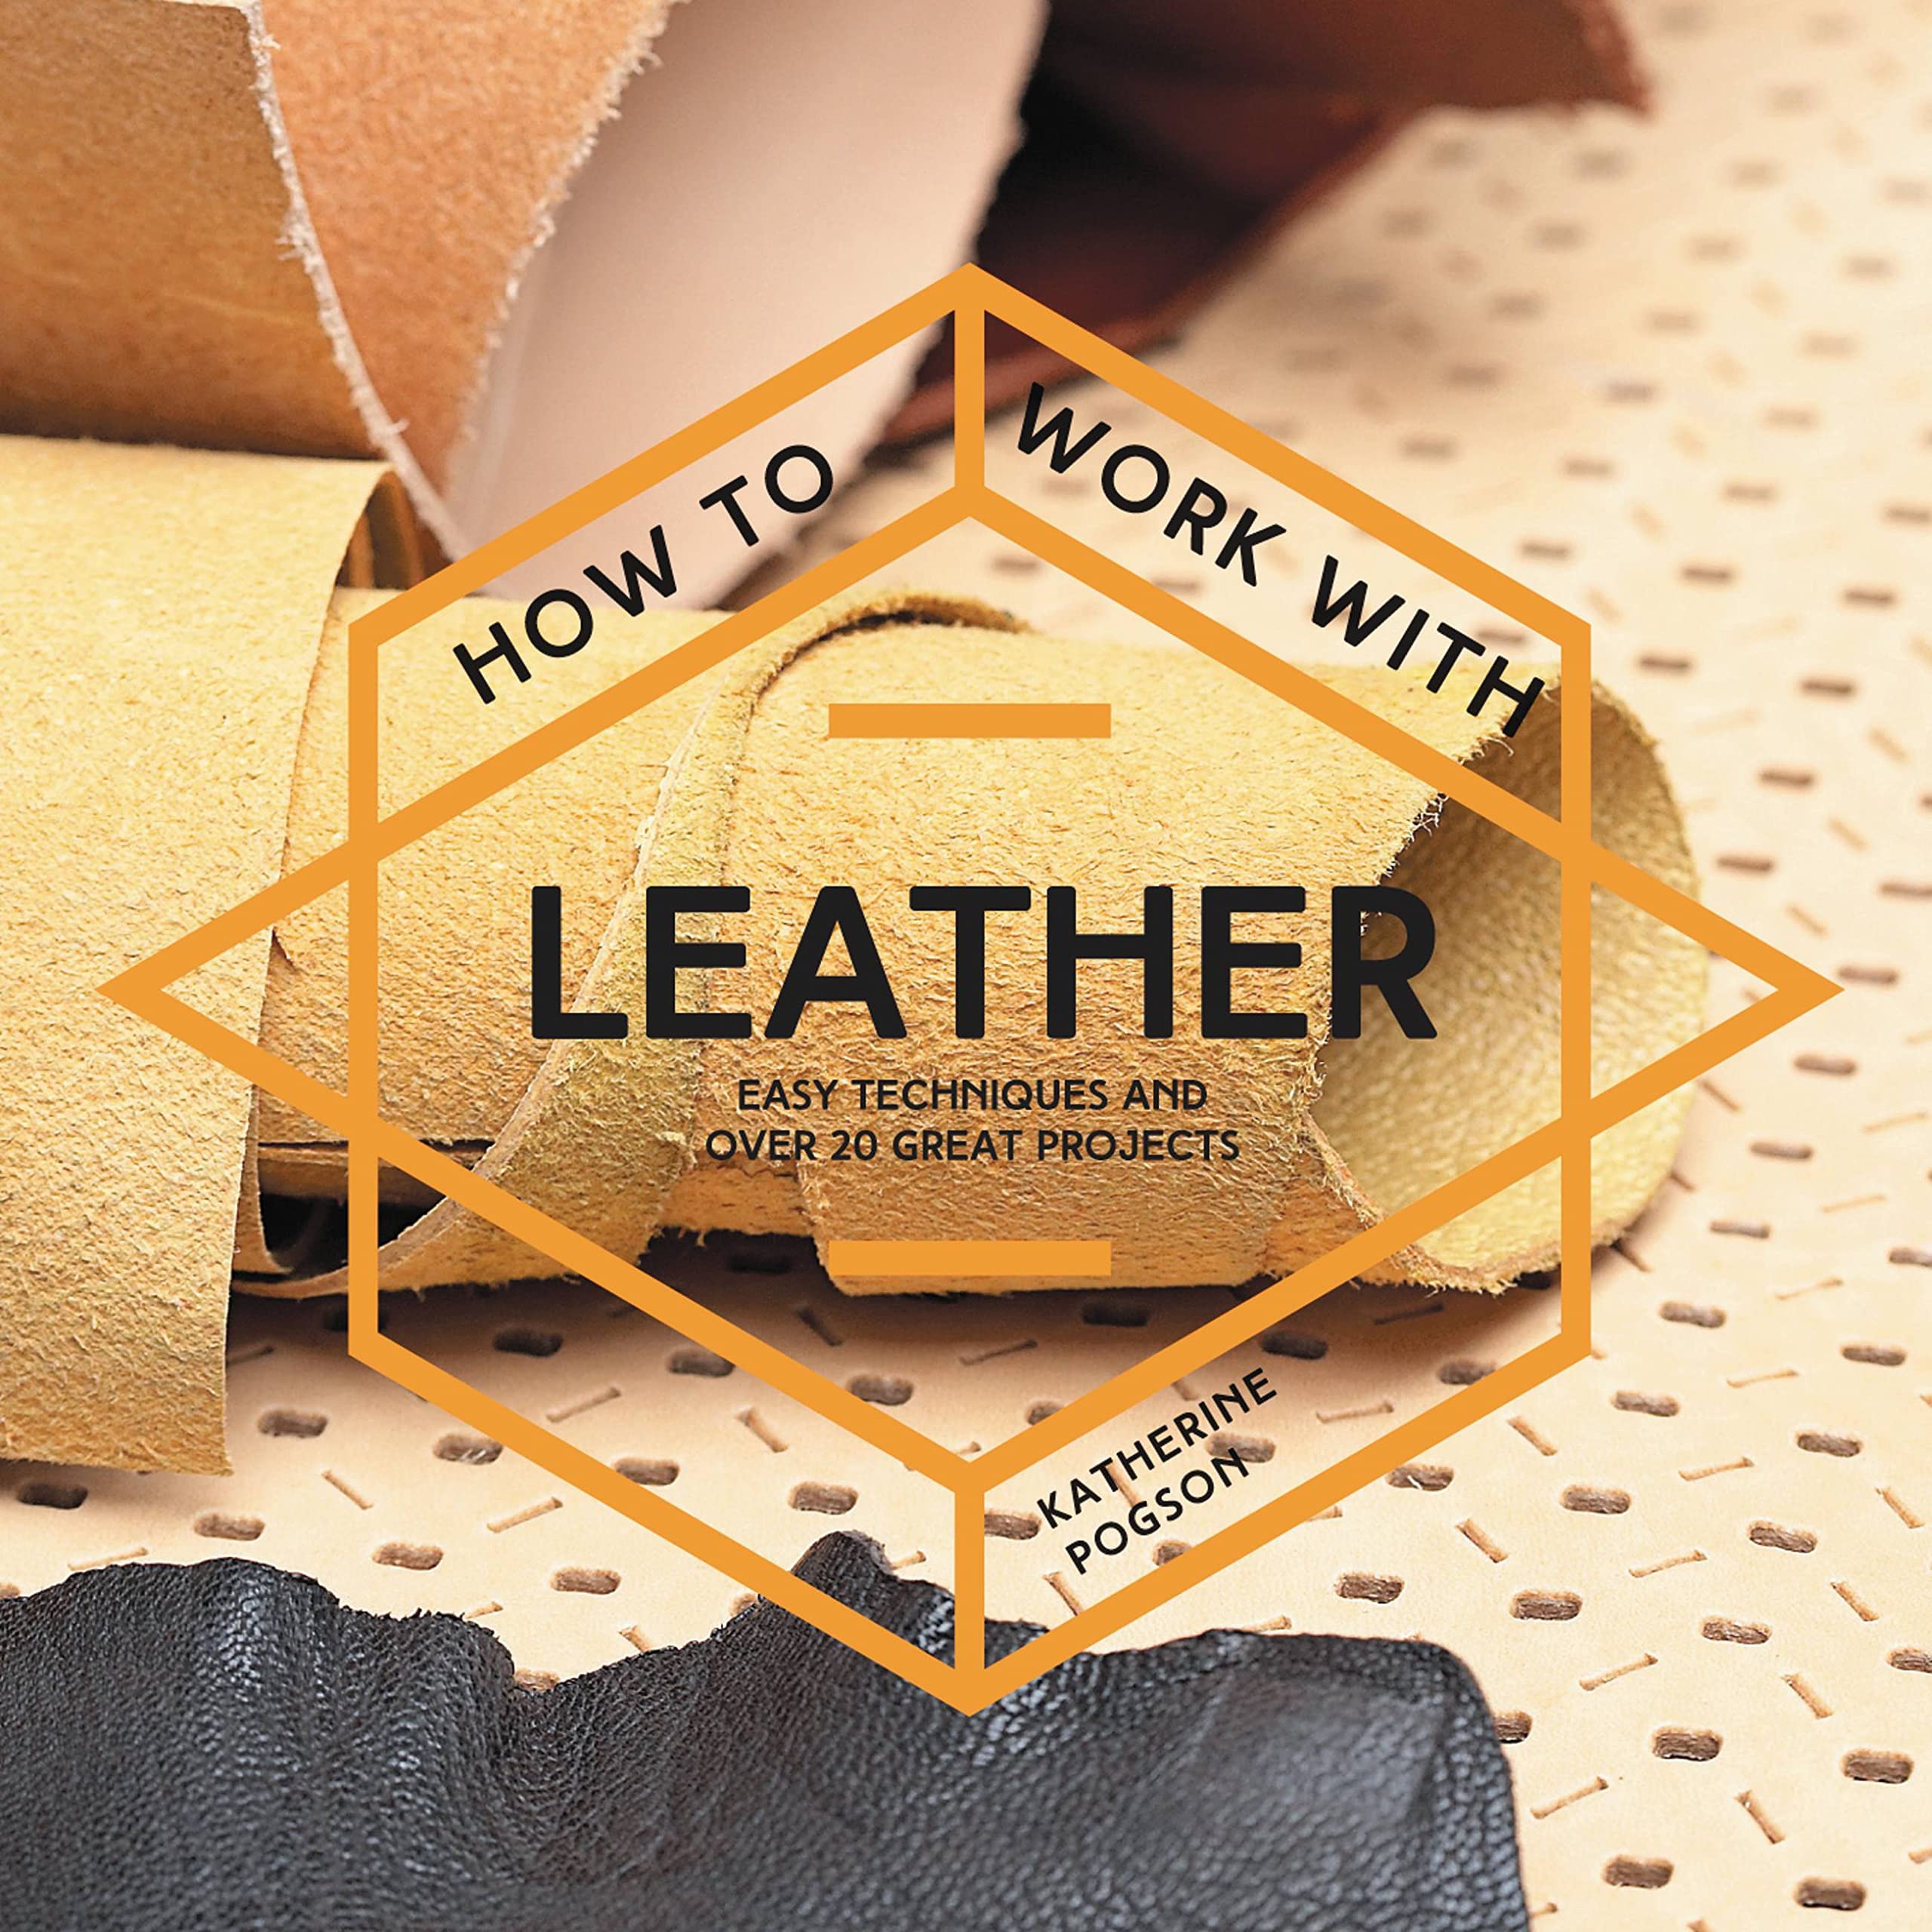 How To Work With Leather